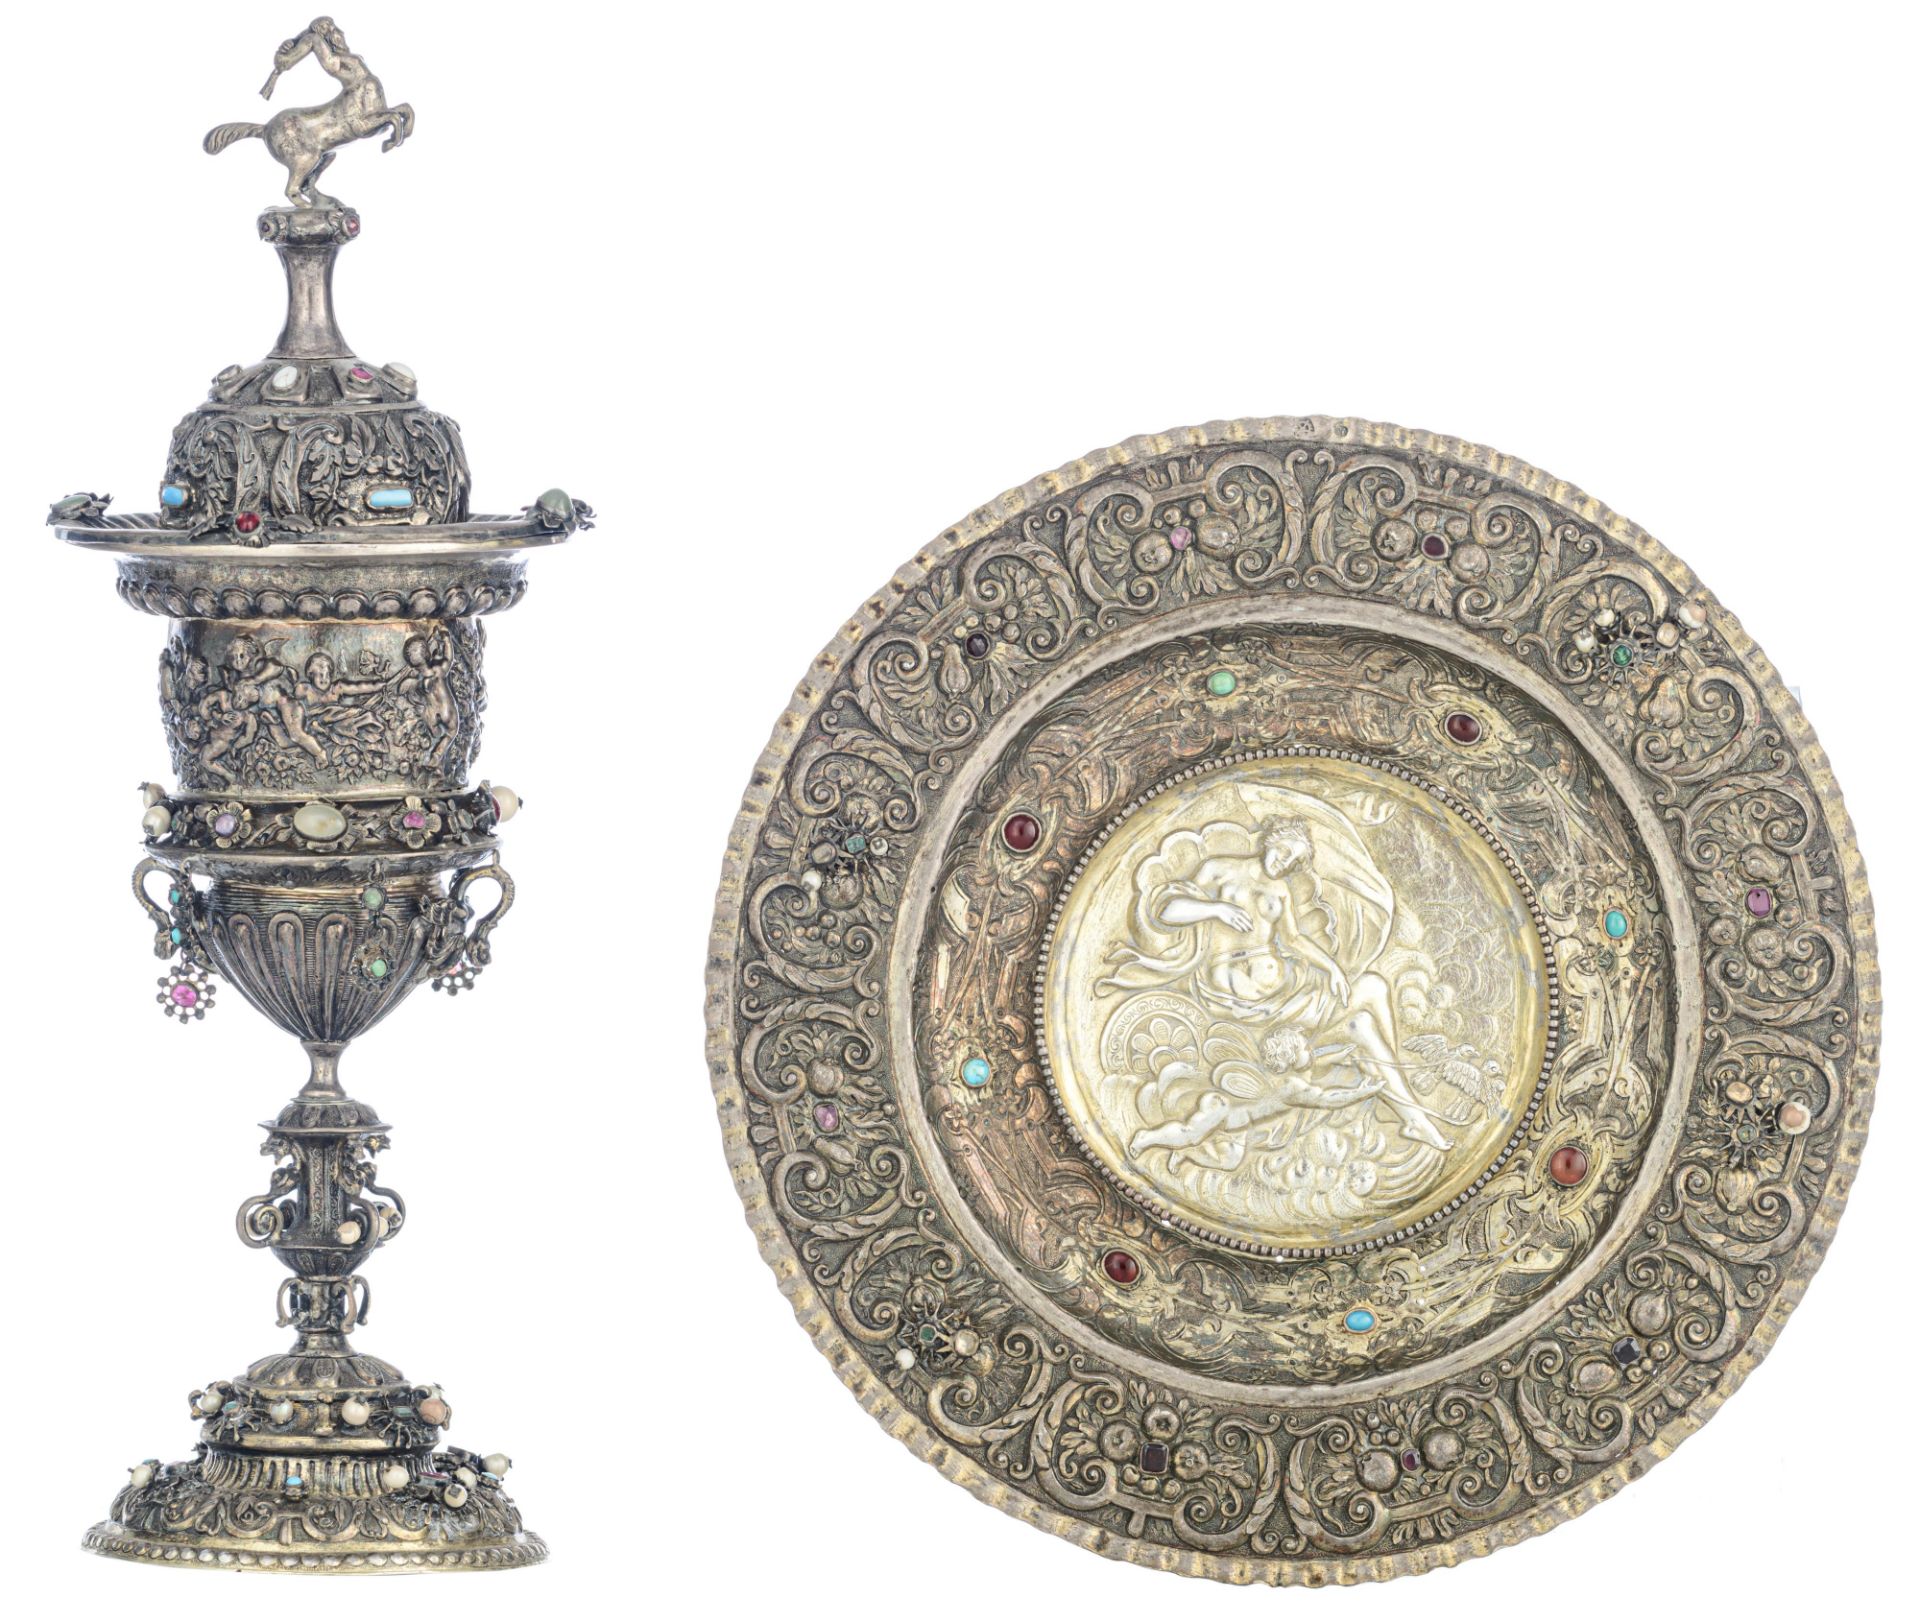 A richly decorated Renaissance style presentation cup on a matching platter, all over decorated by t